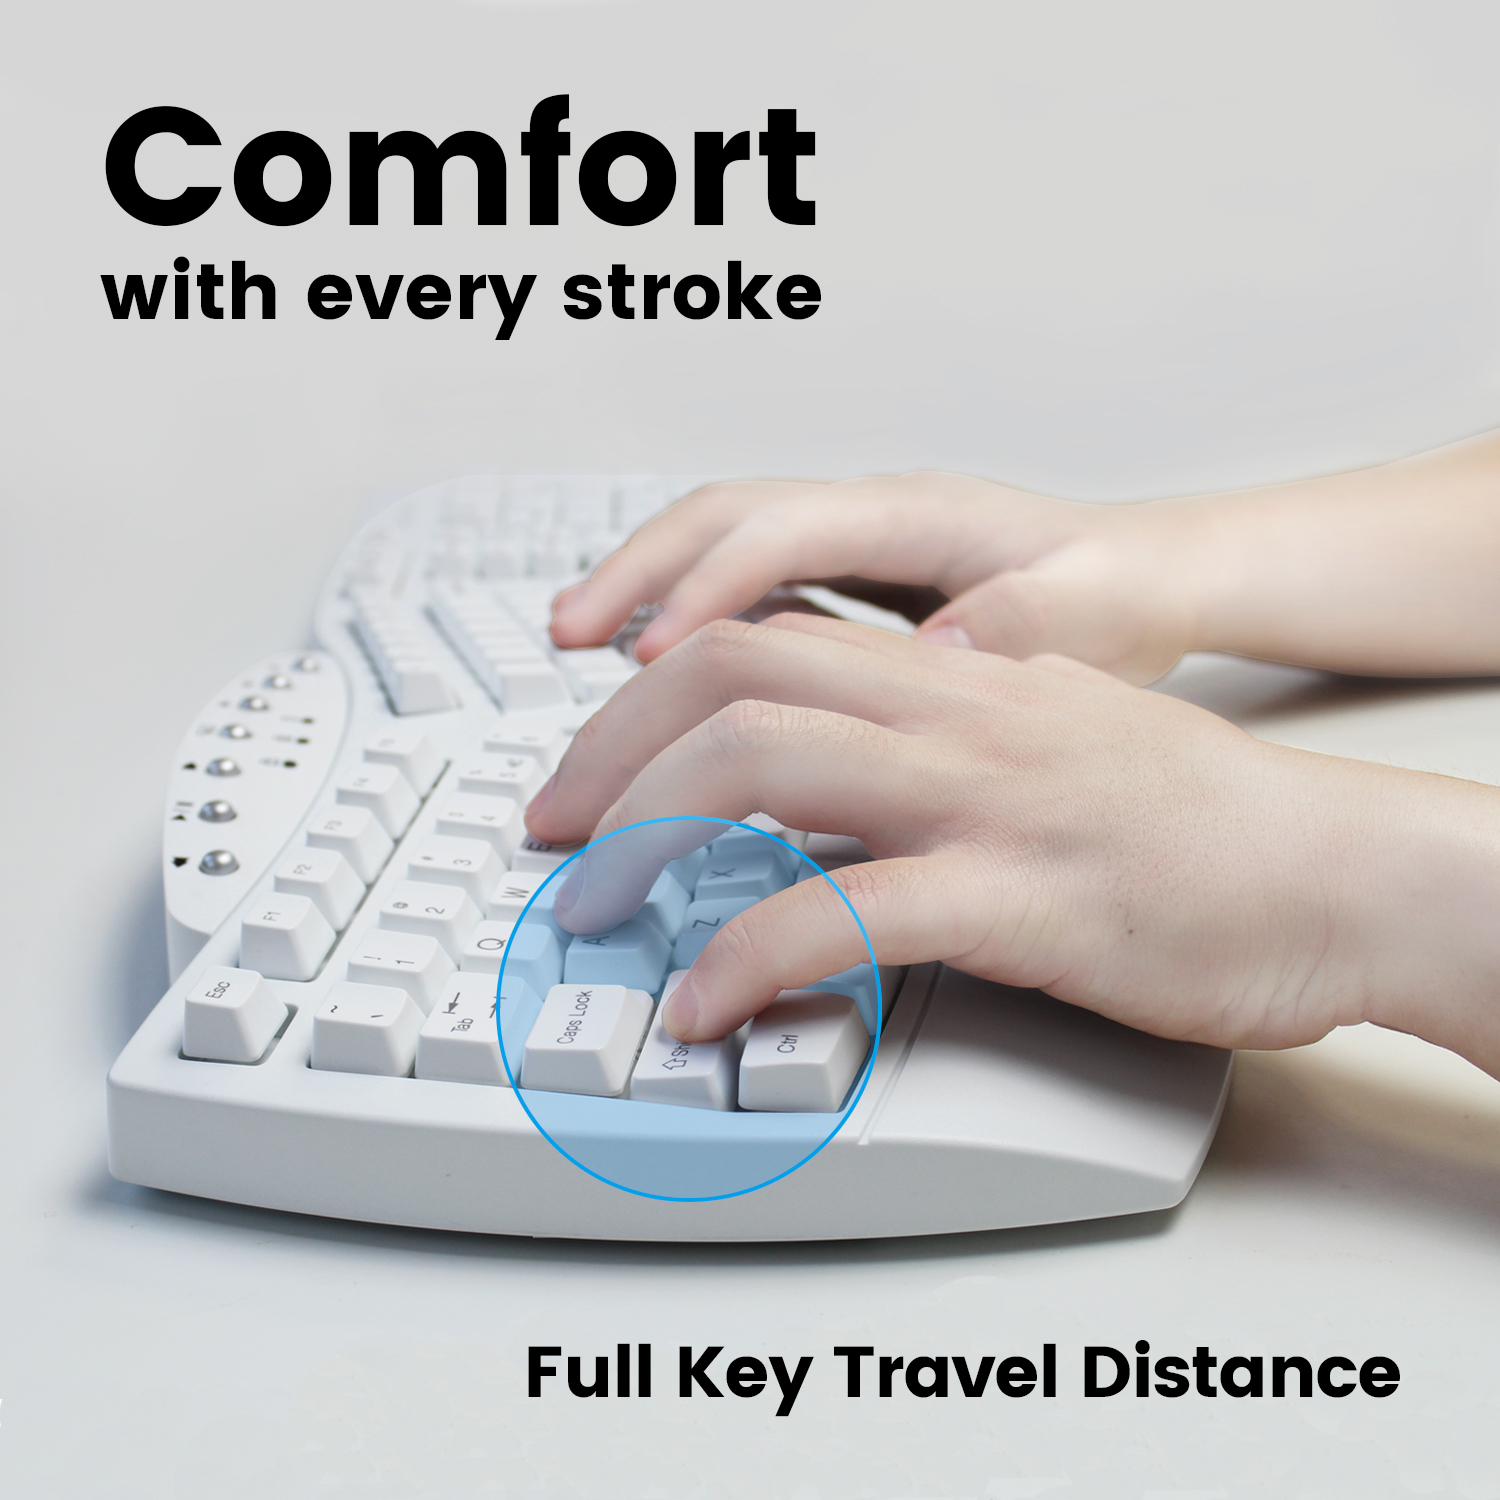 Comfortable Typing Experiences